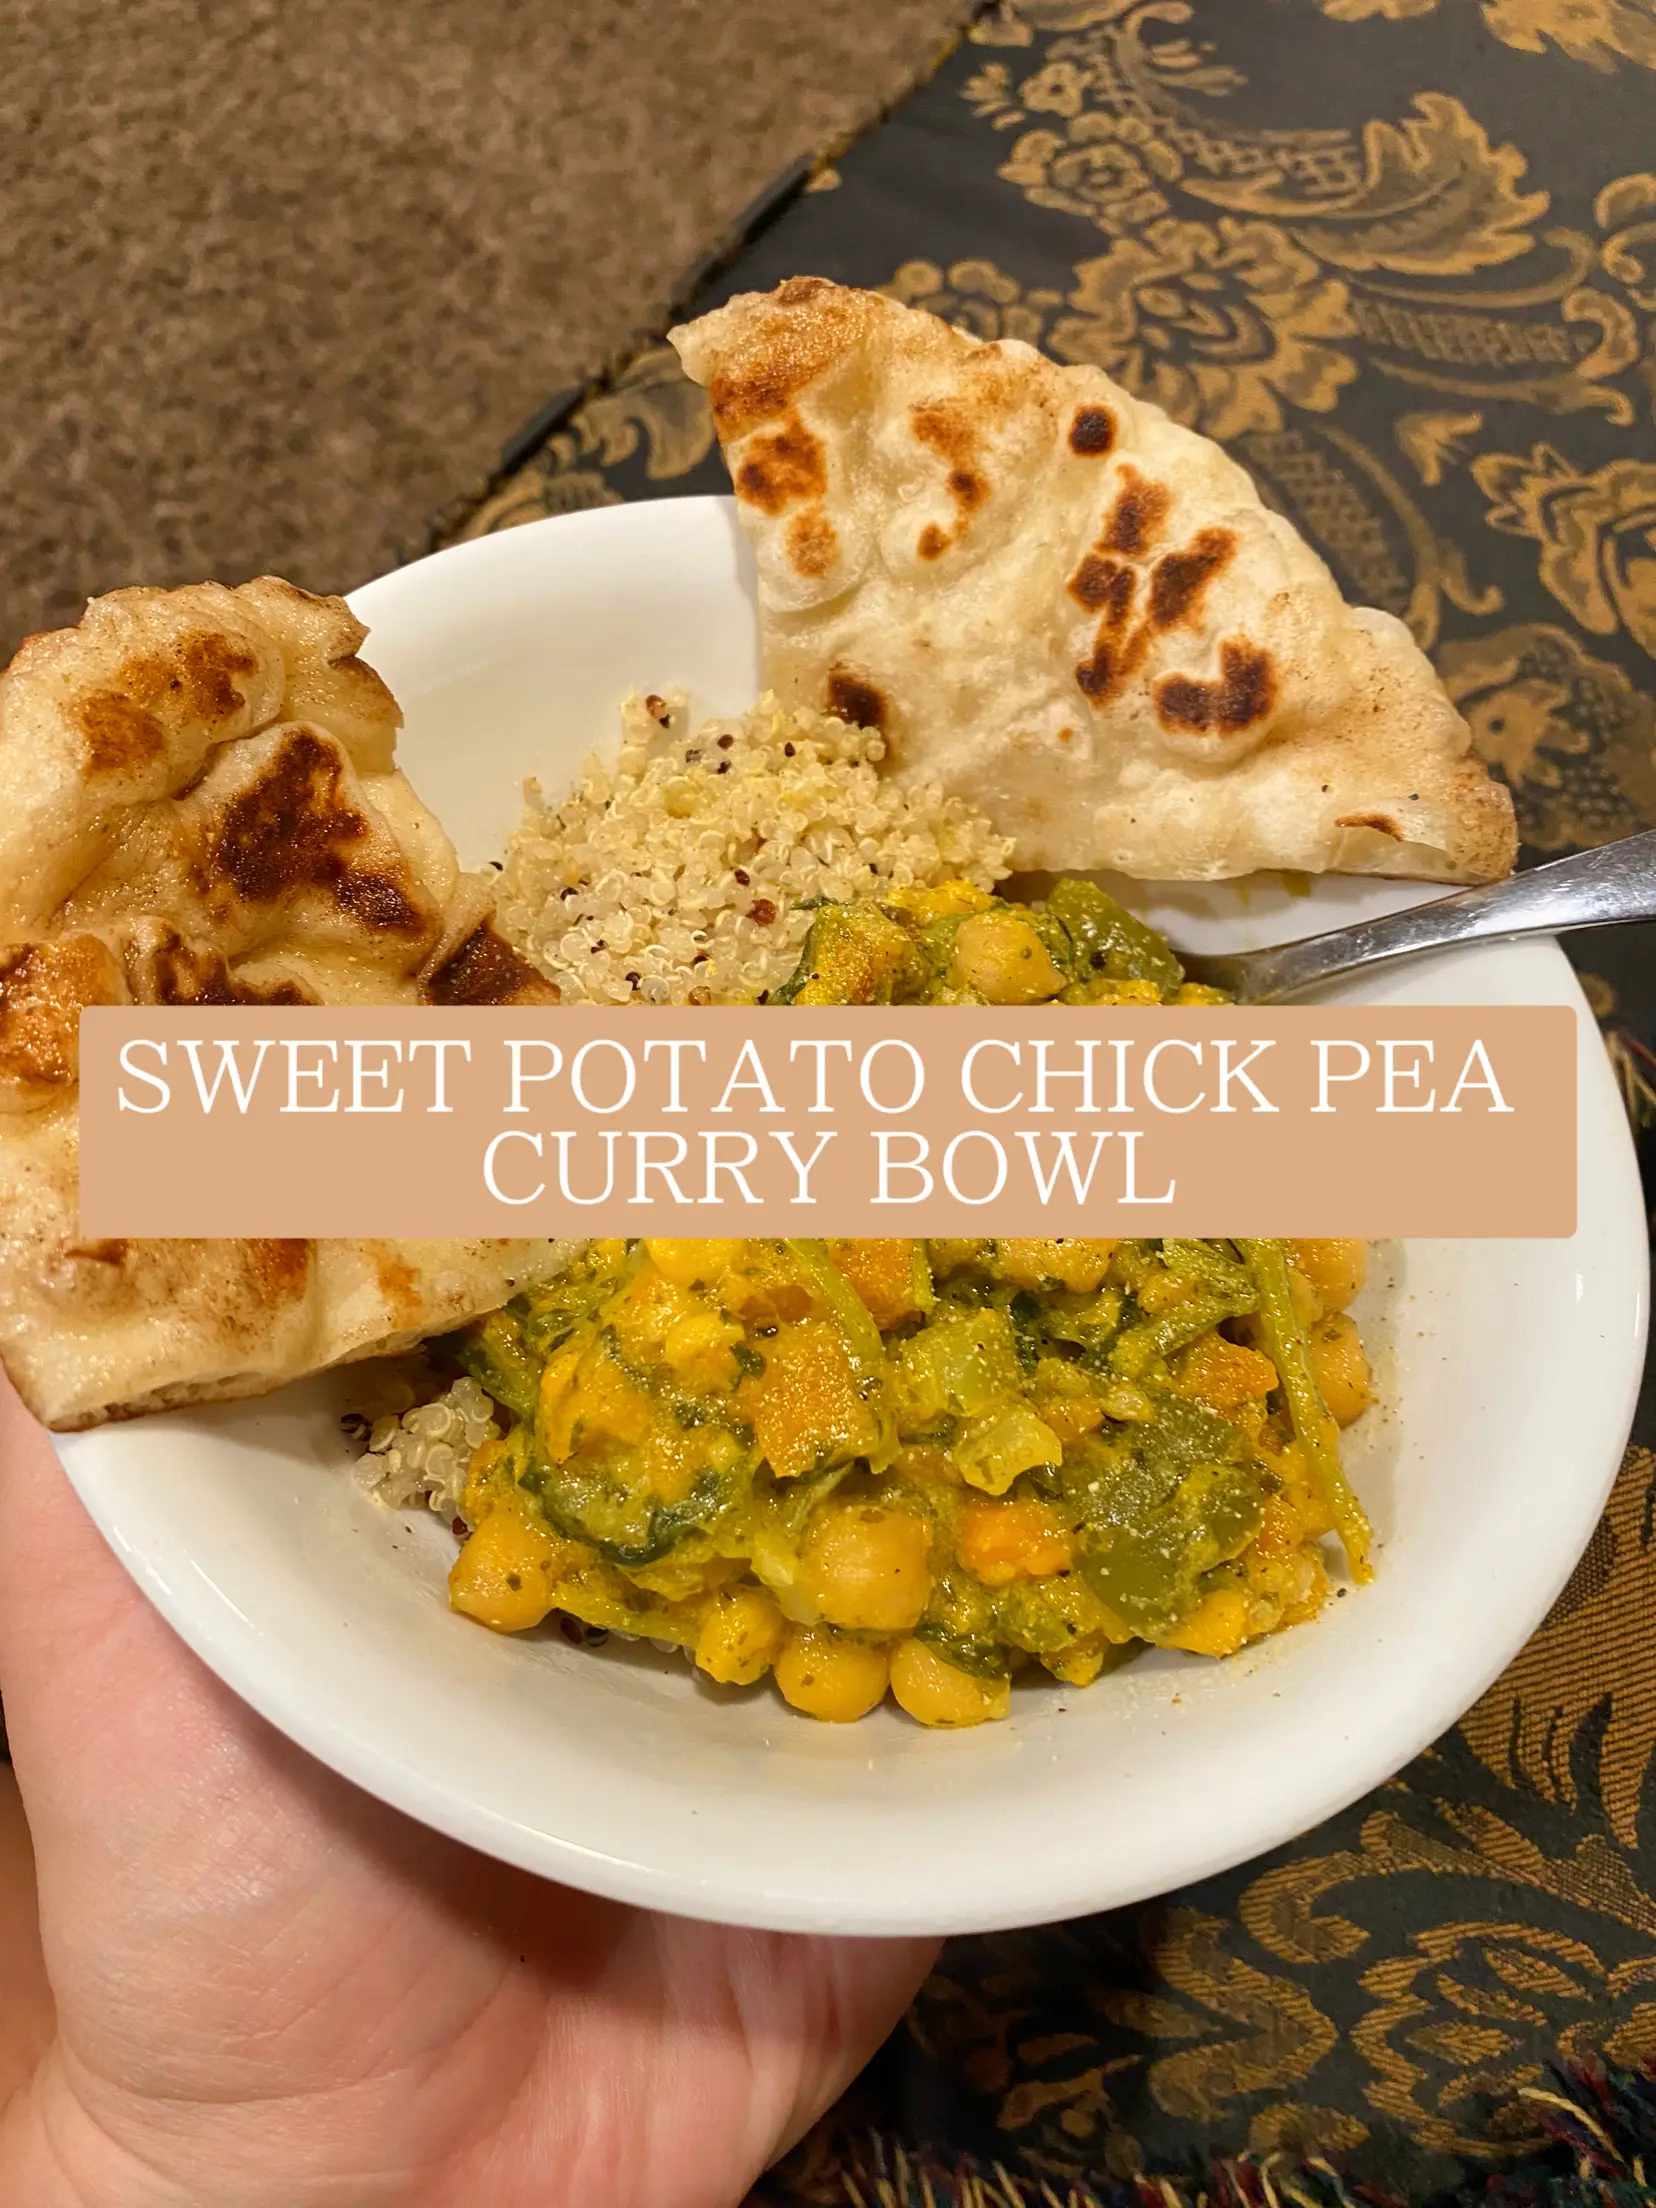 SWEET POTATO CHICK PEA CURRY recipe 's images